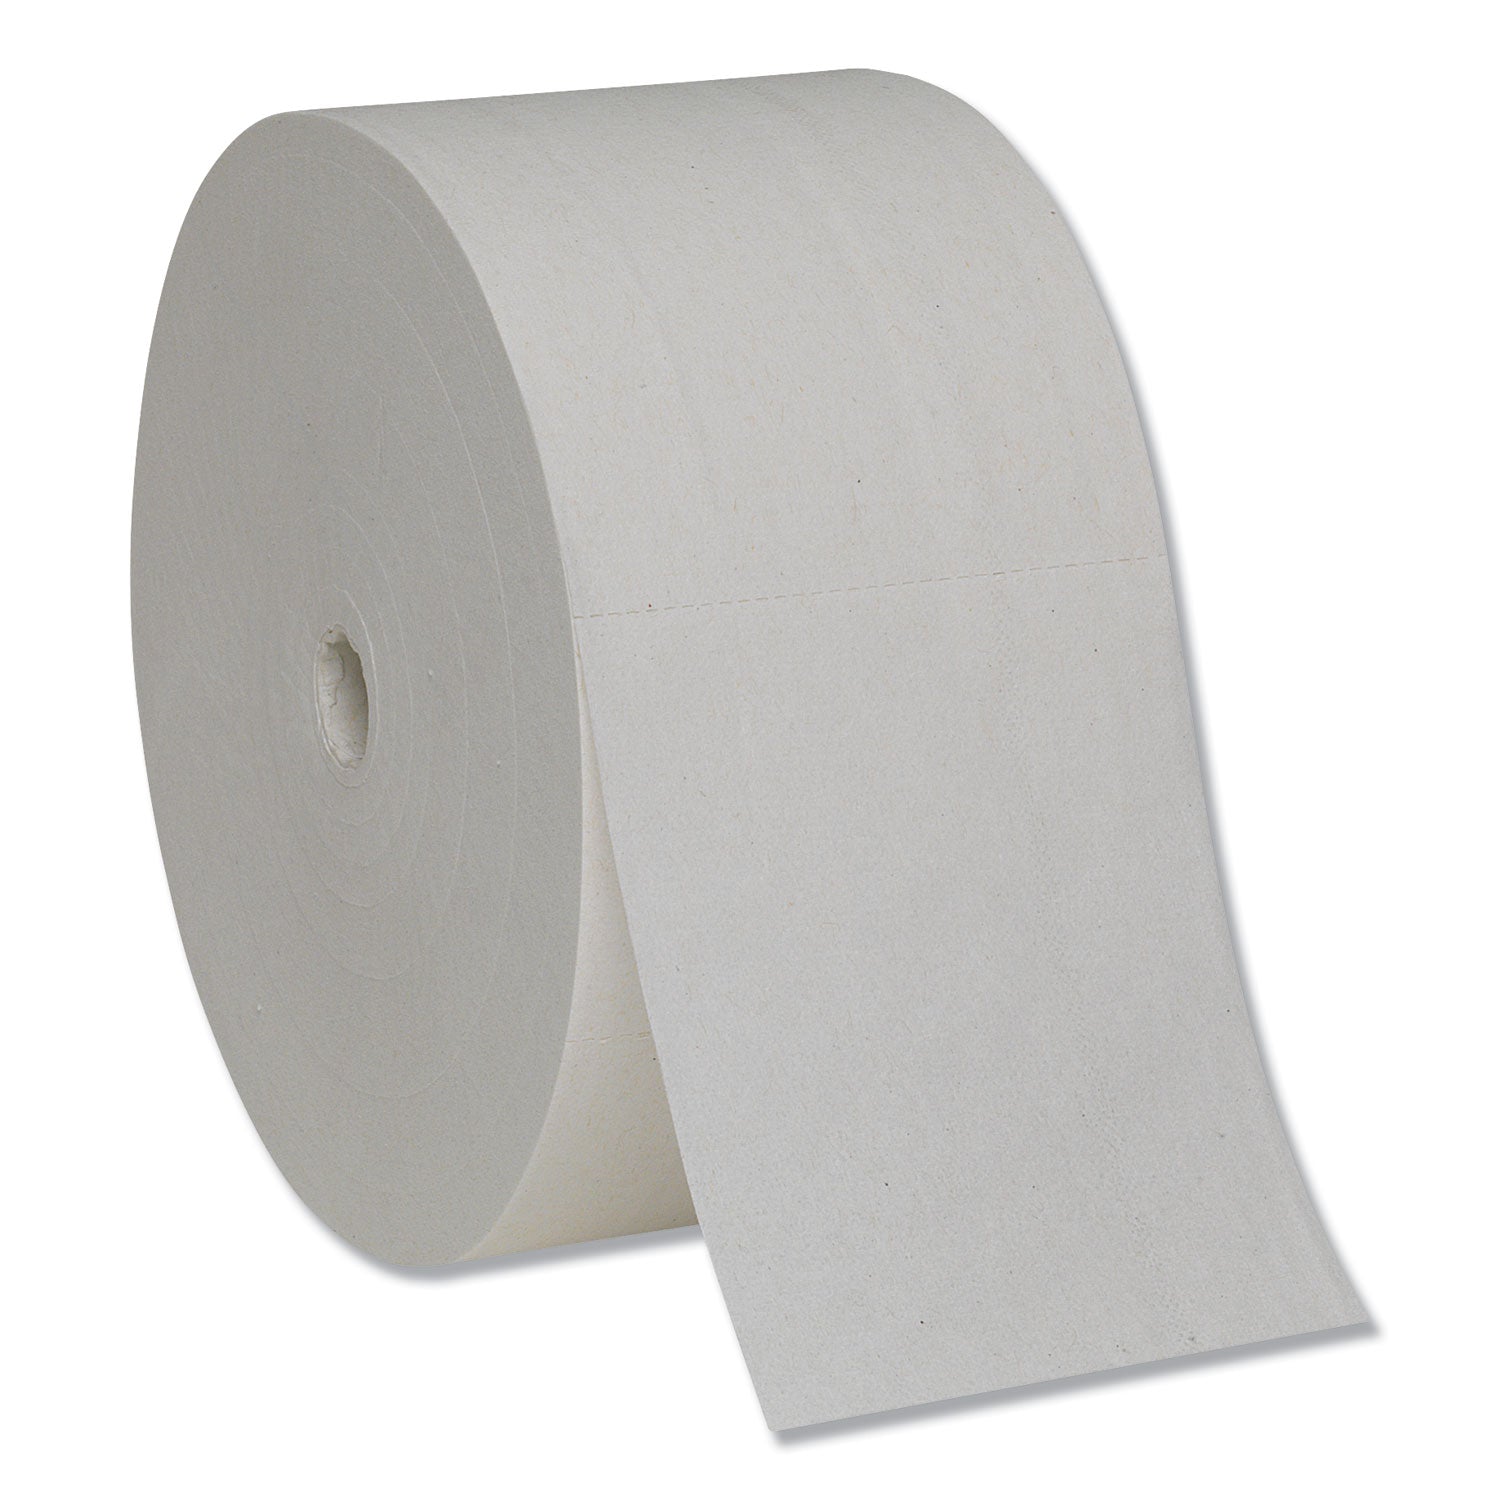 pacific-blue-ultra-coreless-toilet-paper-septic-safe-2-ply-white-1700-sheets-roll-24-rolls-carton_gpc11728 - 1